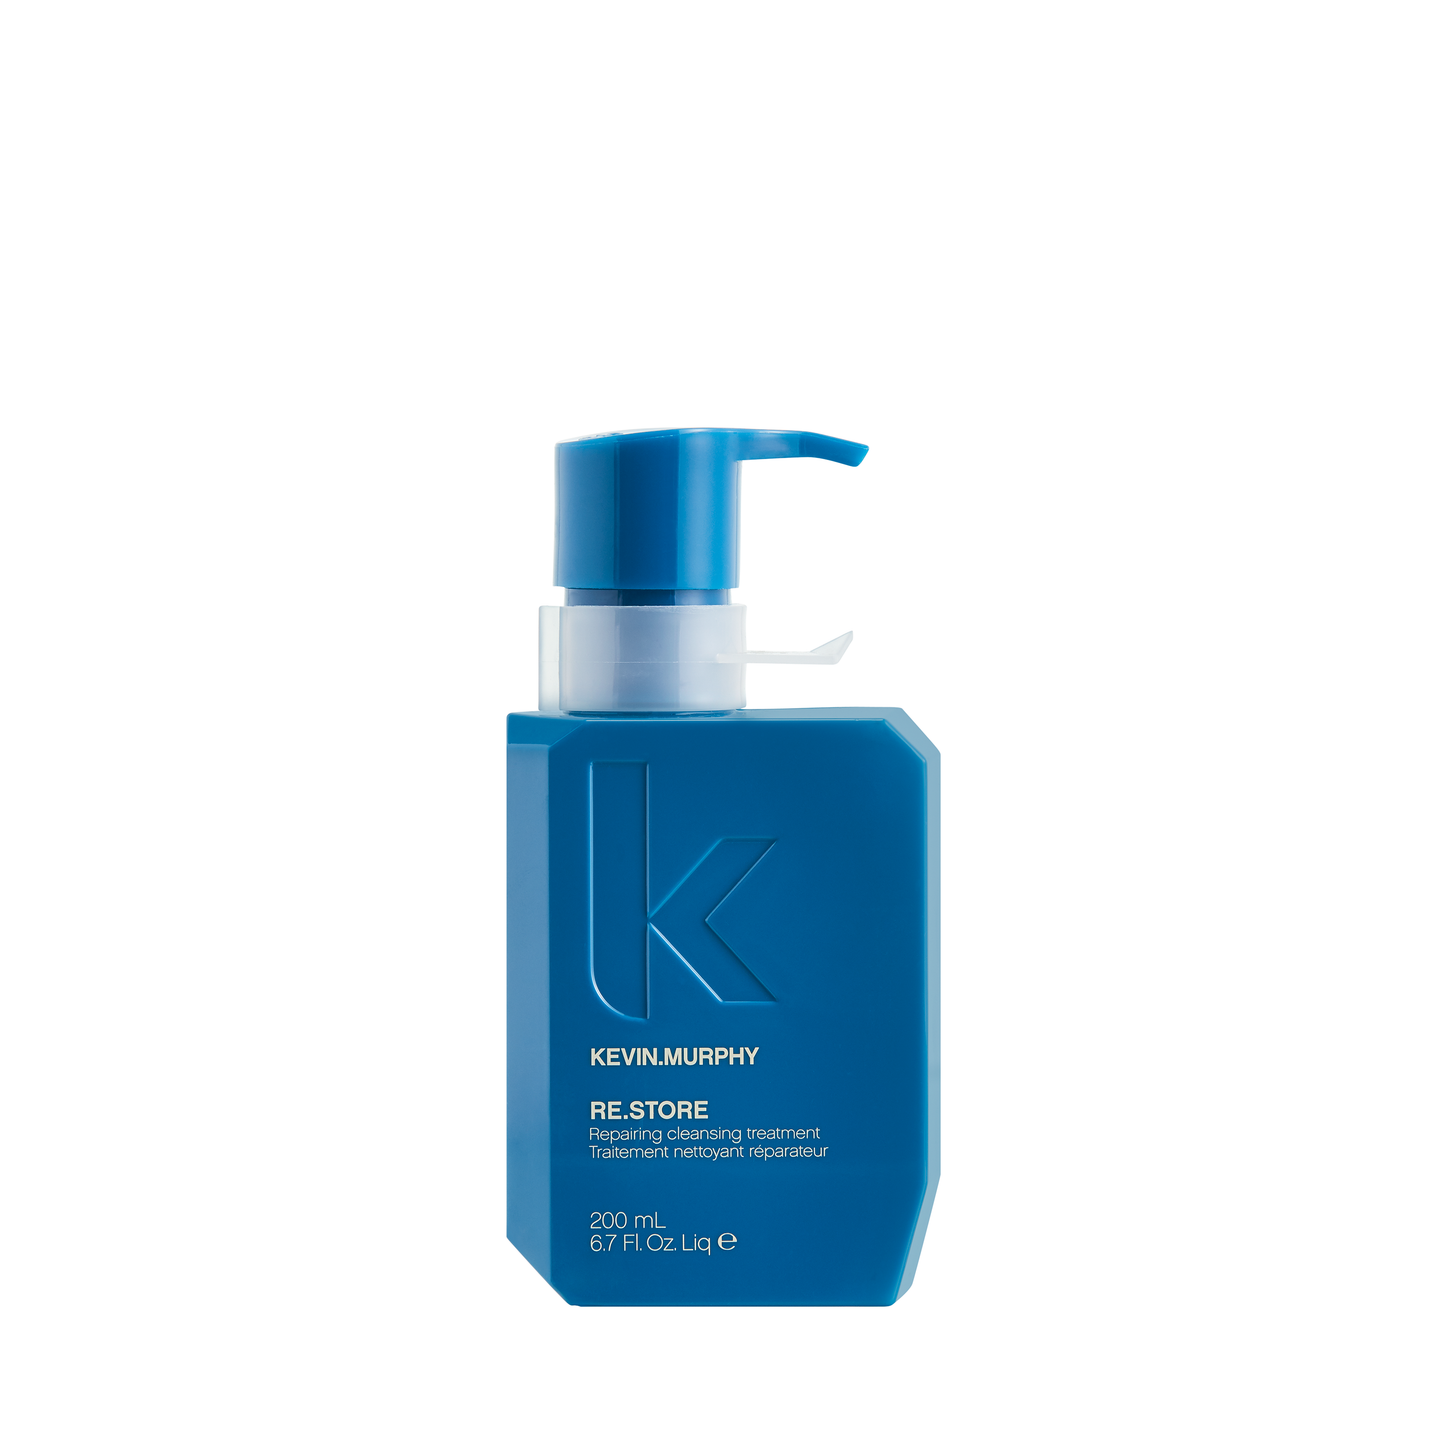 KEVIN.MURPHY - RE.STORE